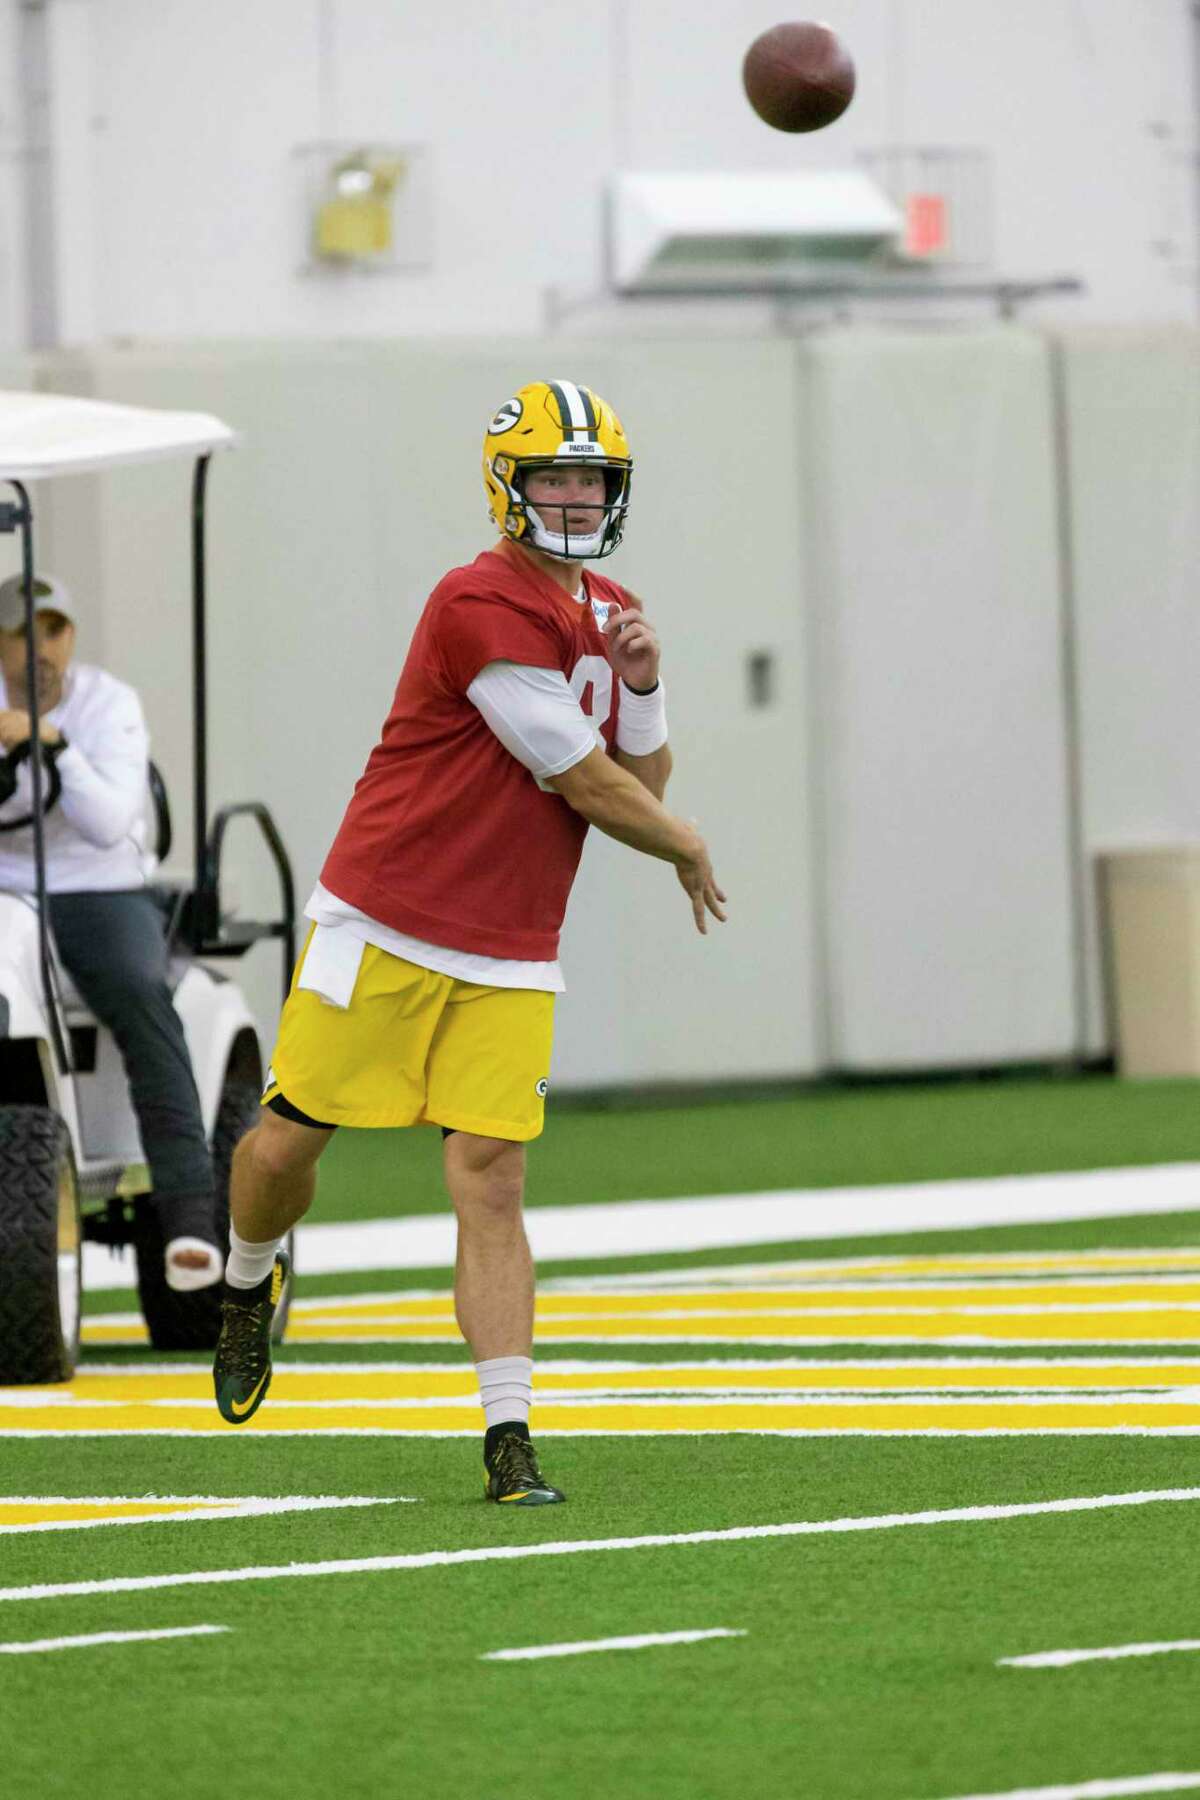 Green Bay Packers Tim Boyle throws during NFL football minicamp practice earlier this month in Green Bay, Wis.